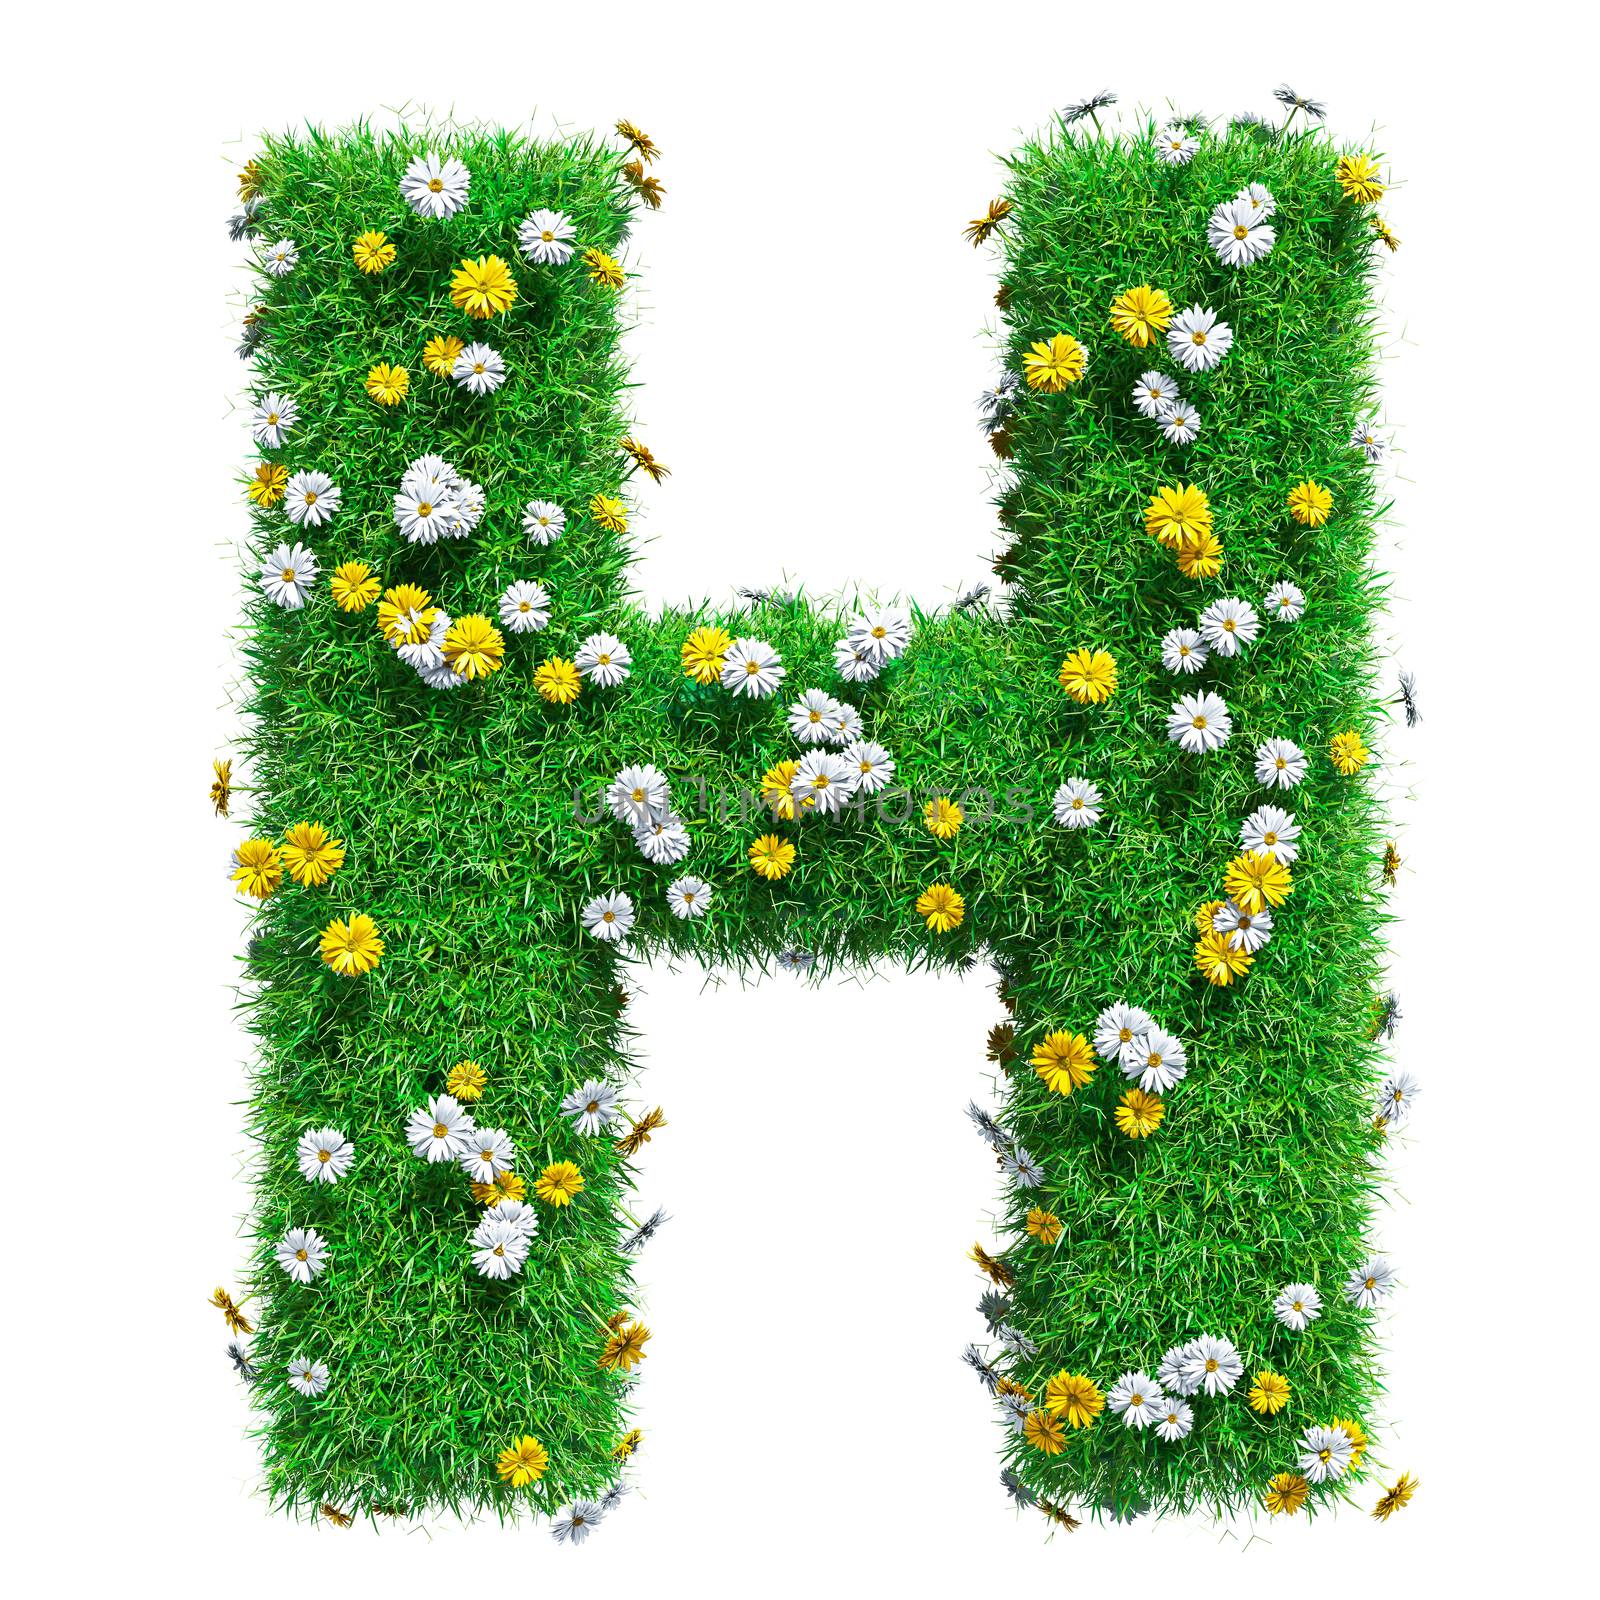 Letter H Of Green Grass And Flowers. Isolated On White Background. Font For Your Design. 3D Illustration